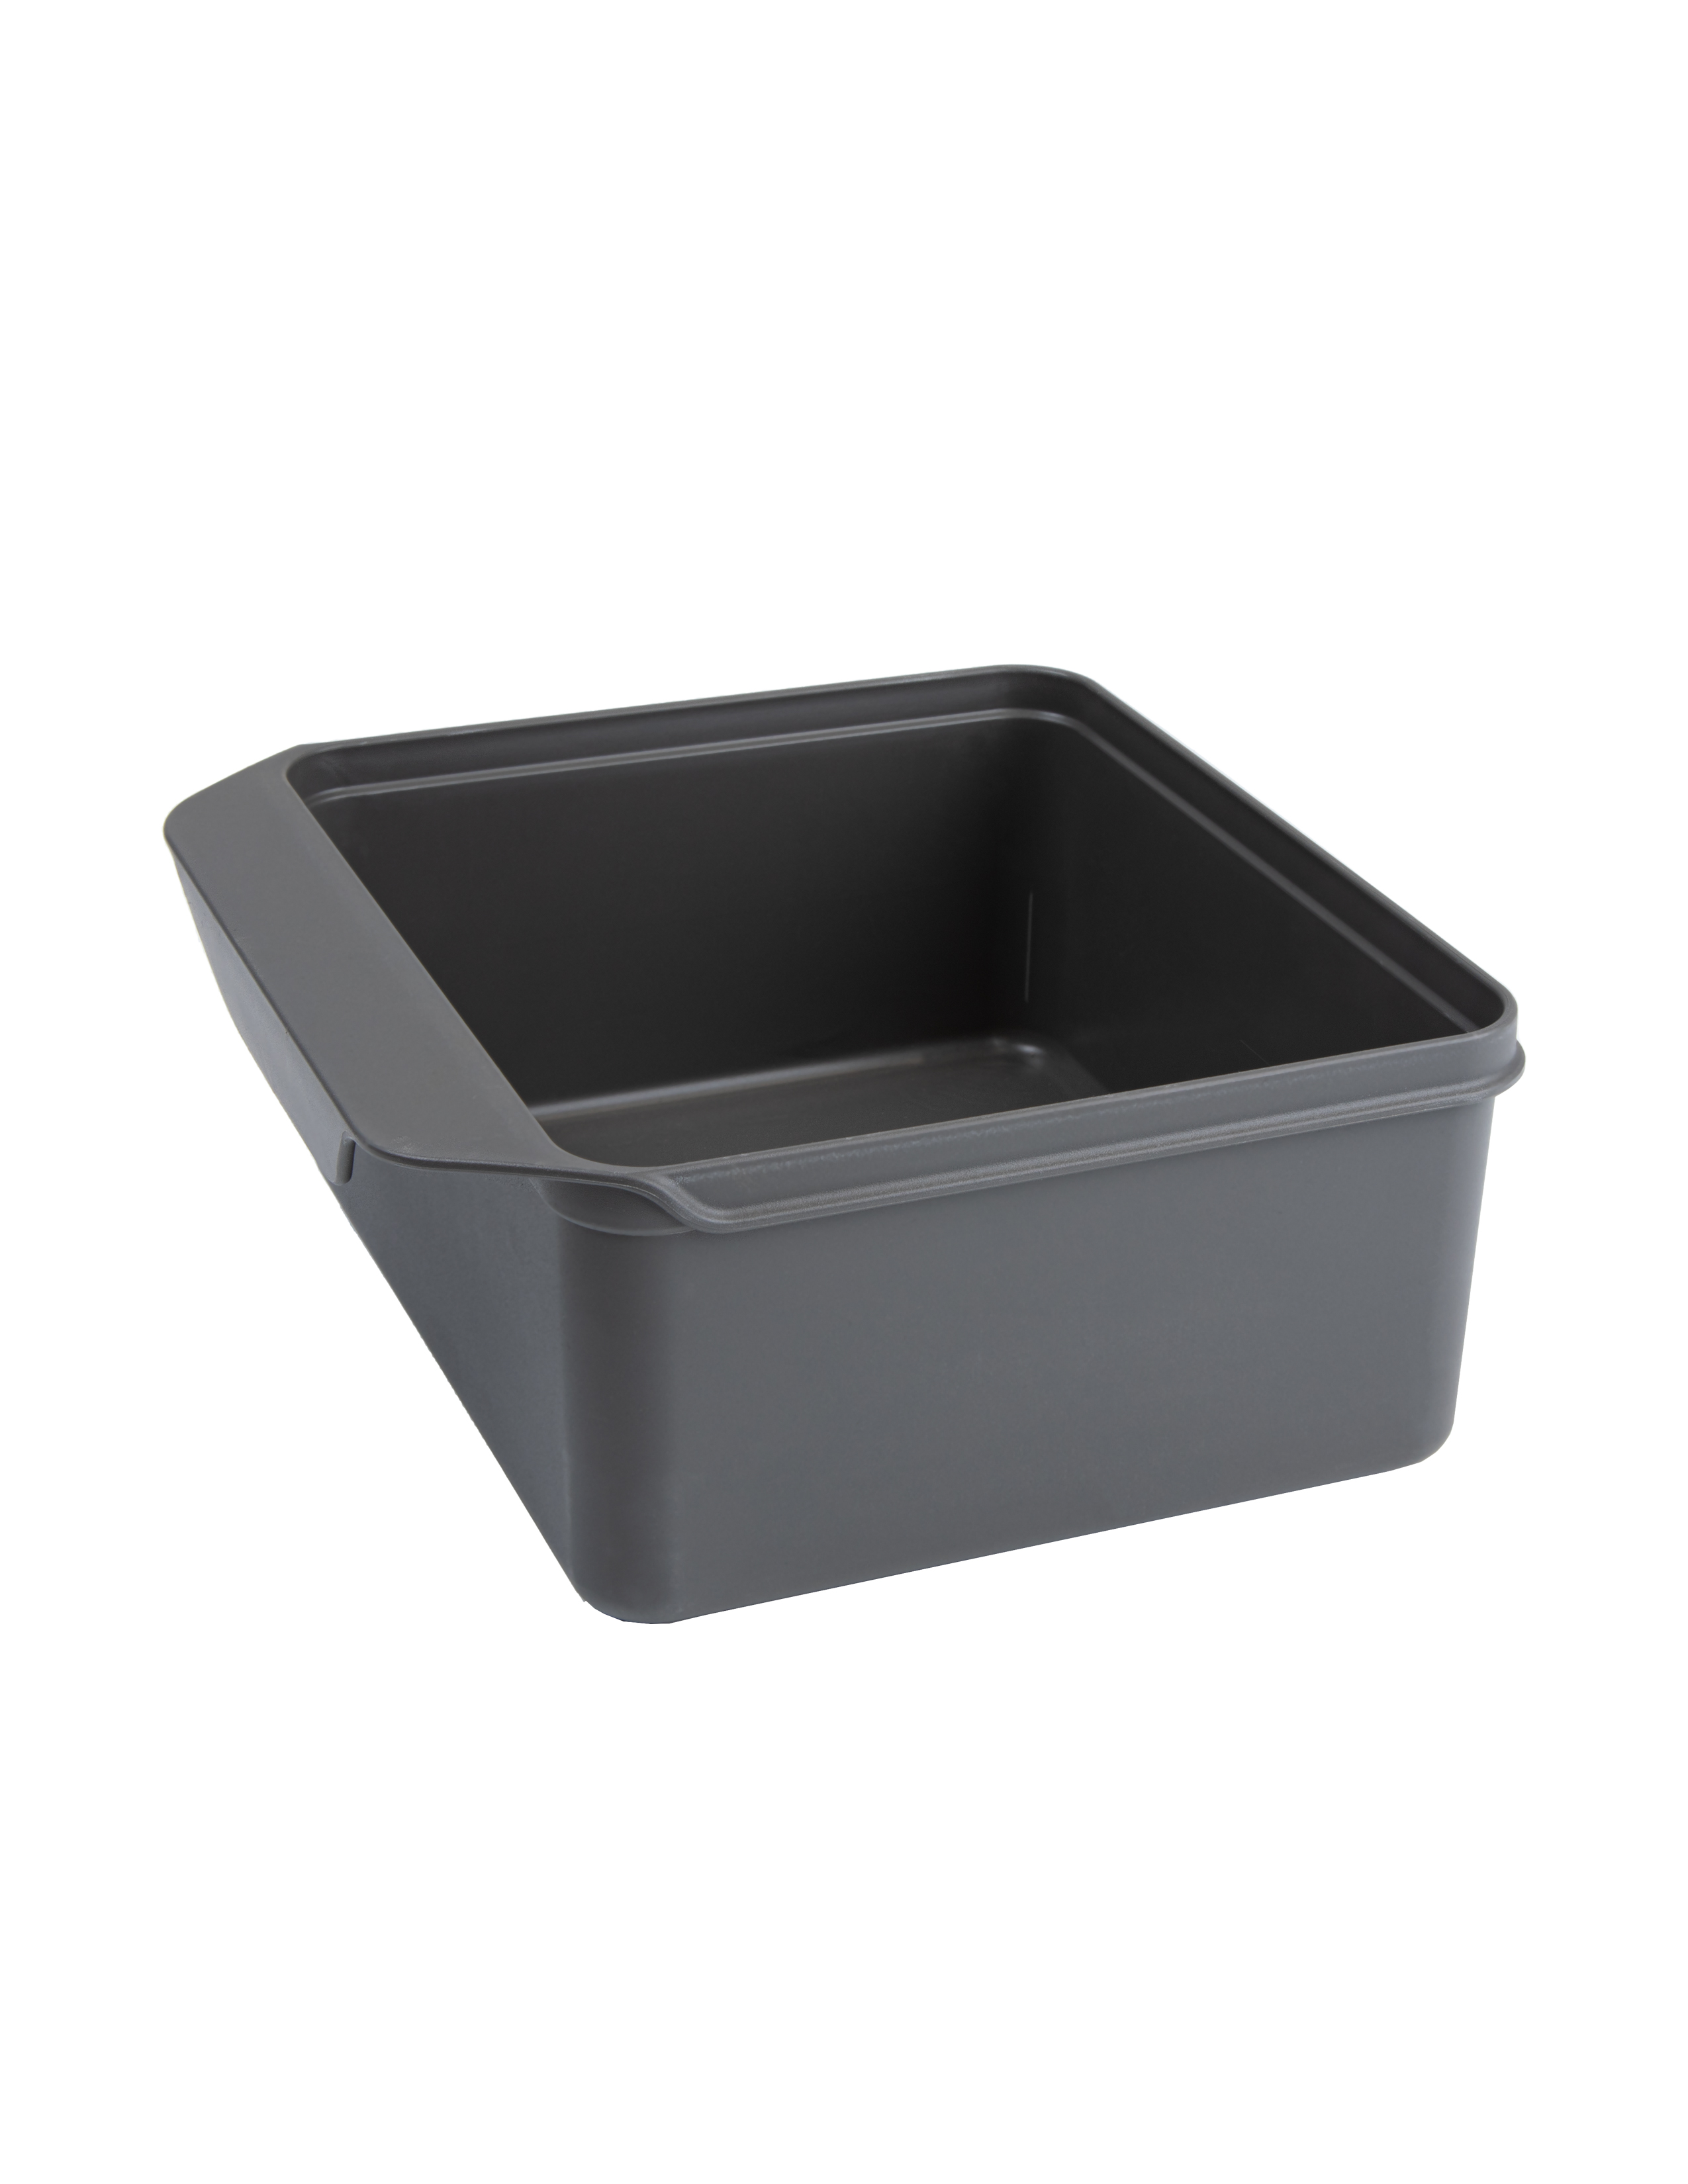 Compost / Wet Waste Bins for Vibo